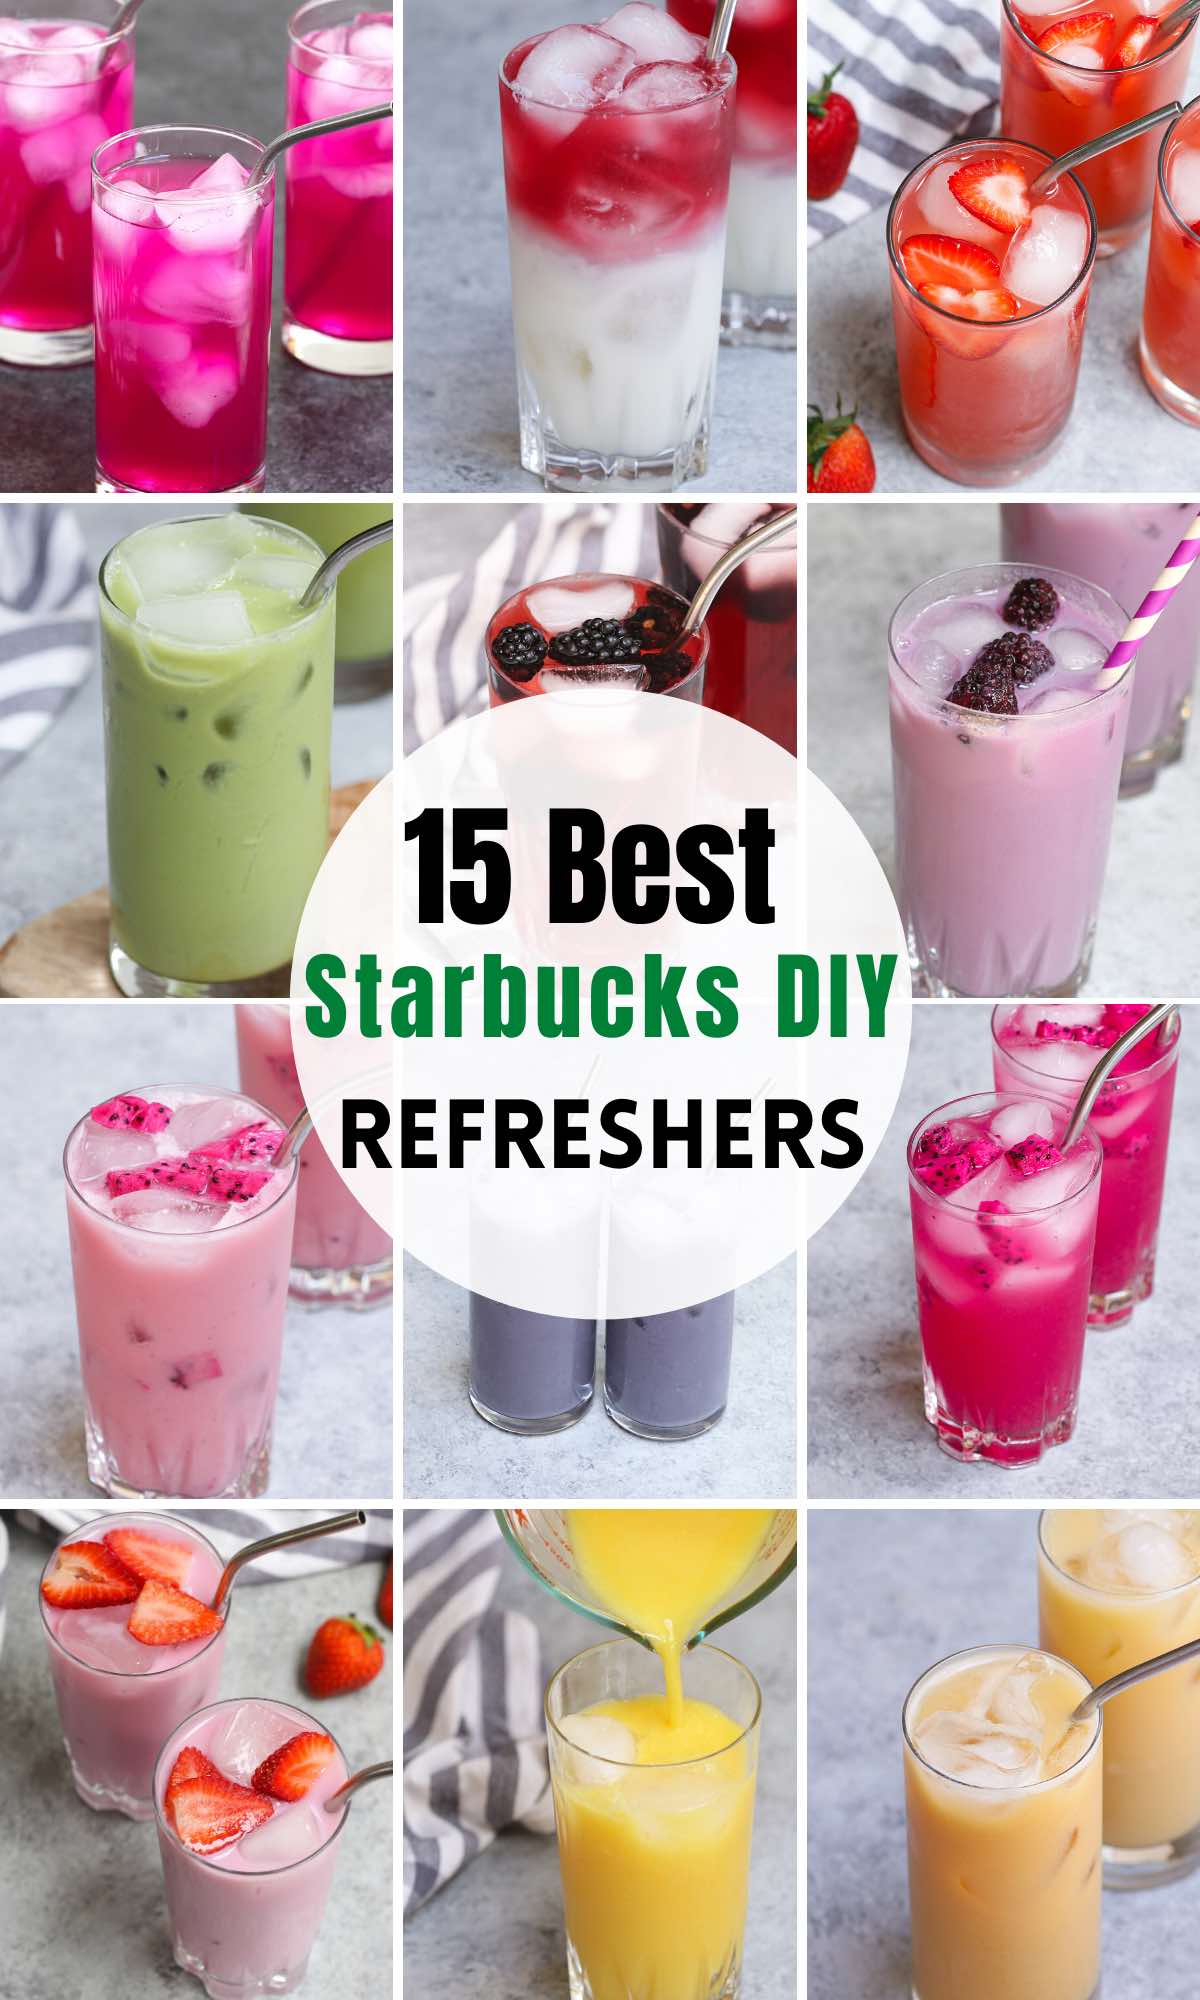 29 Best Starbucks Refreshers and How to Make them at Home